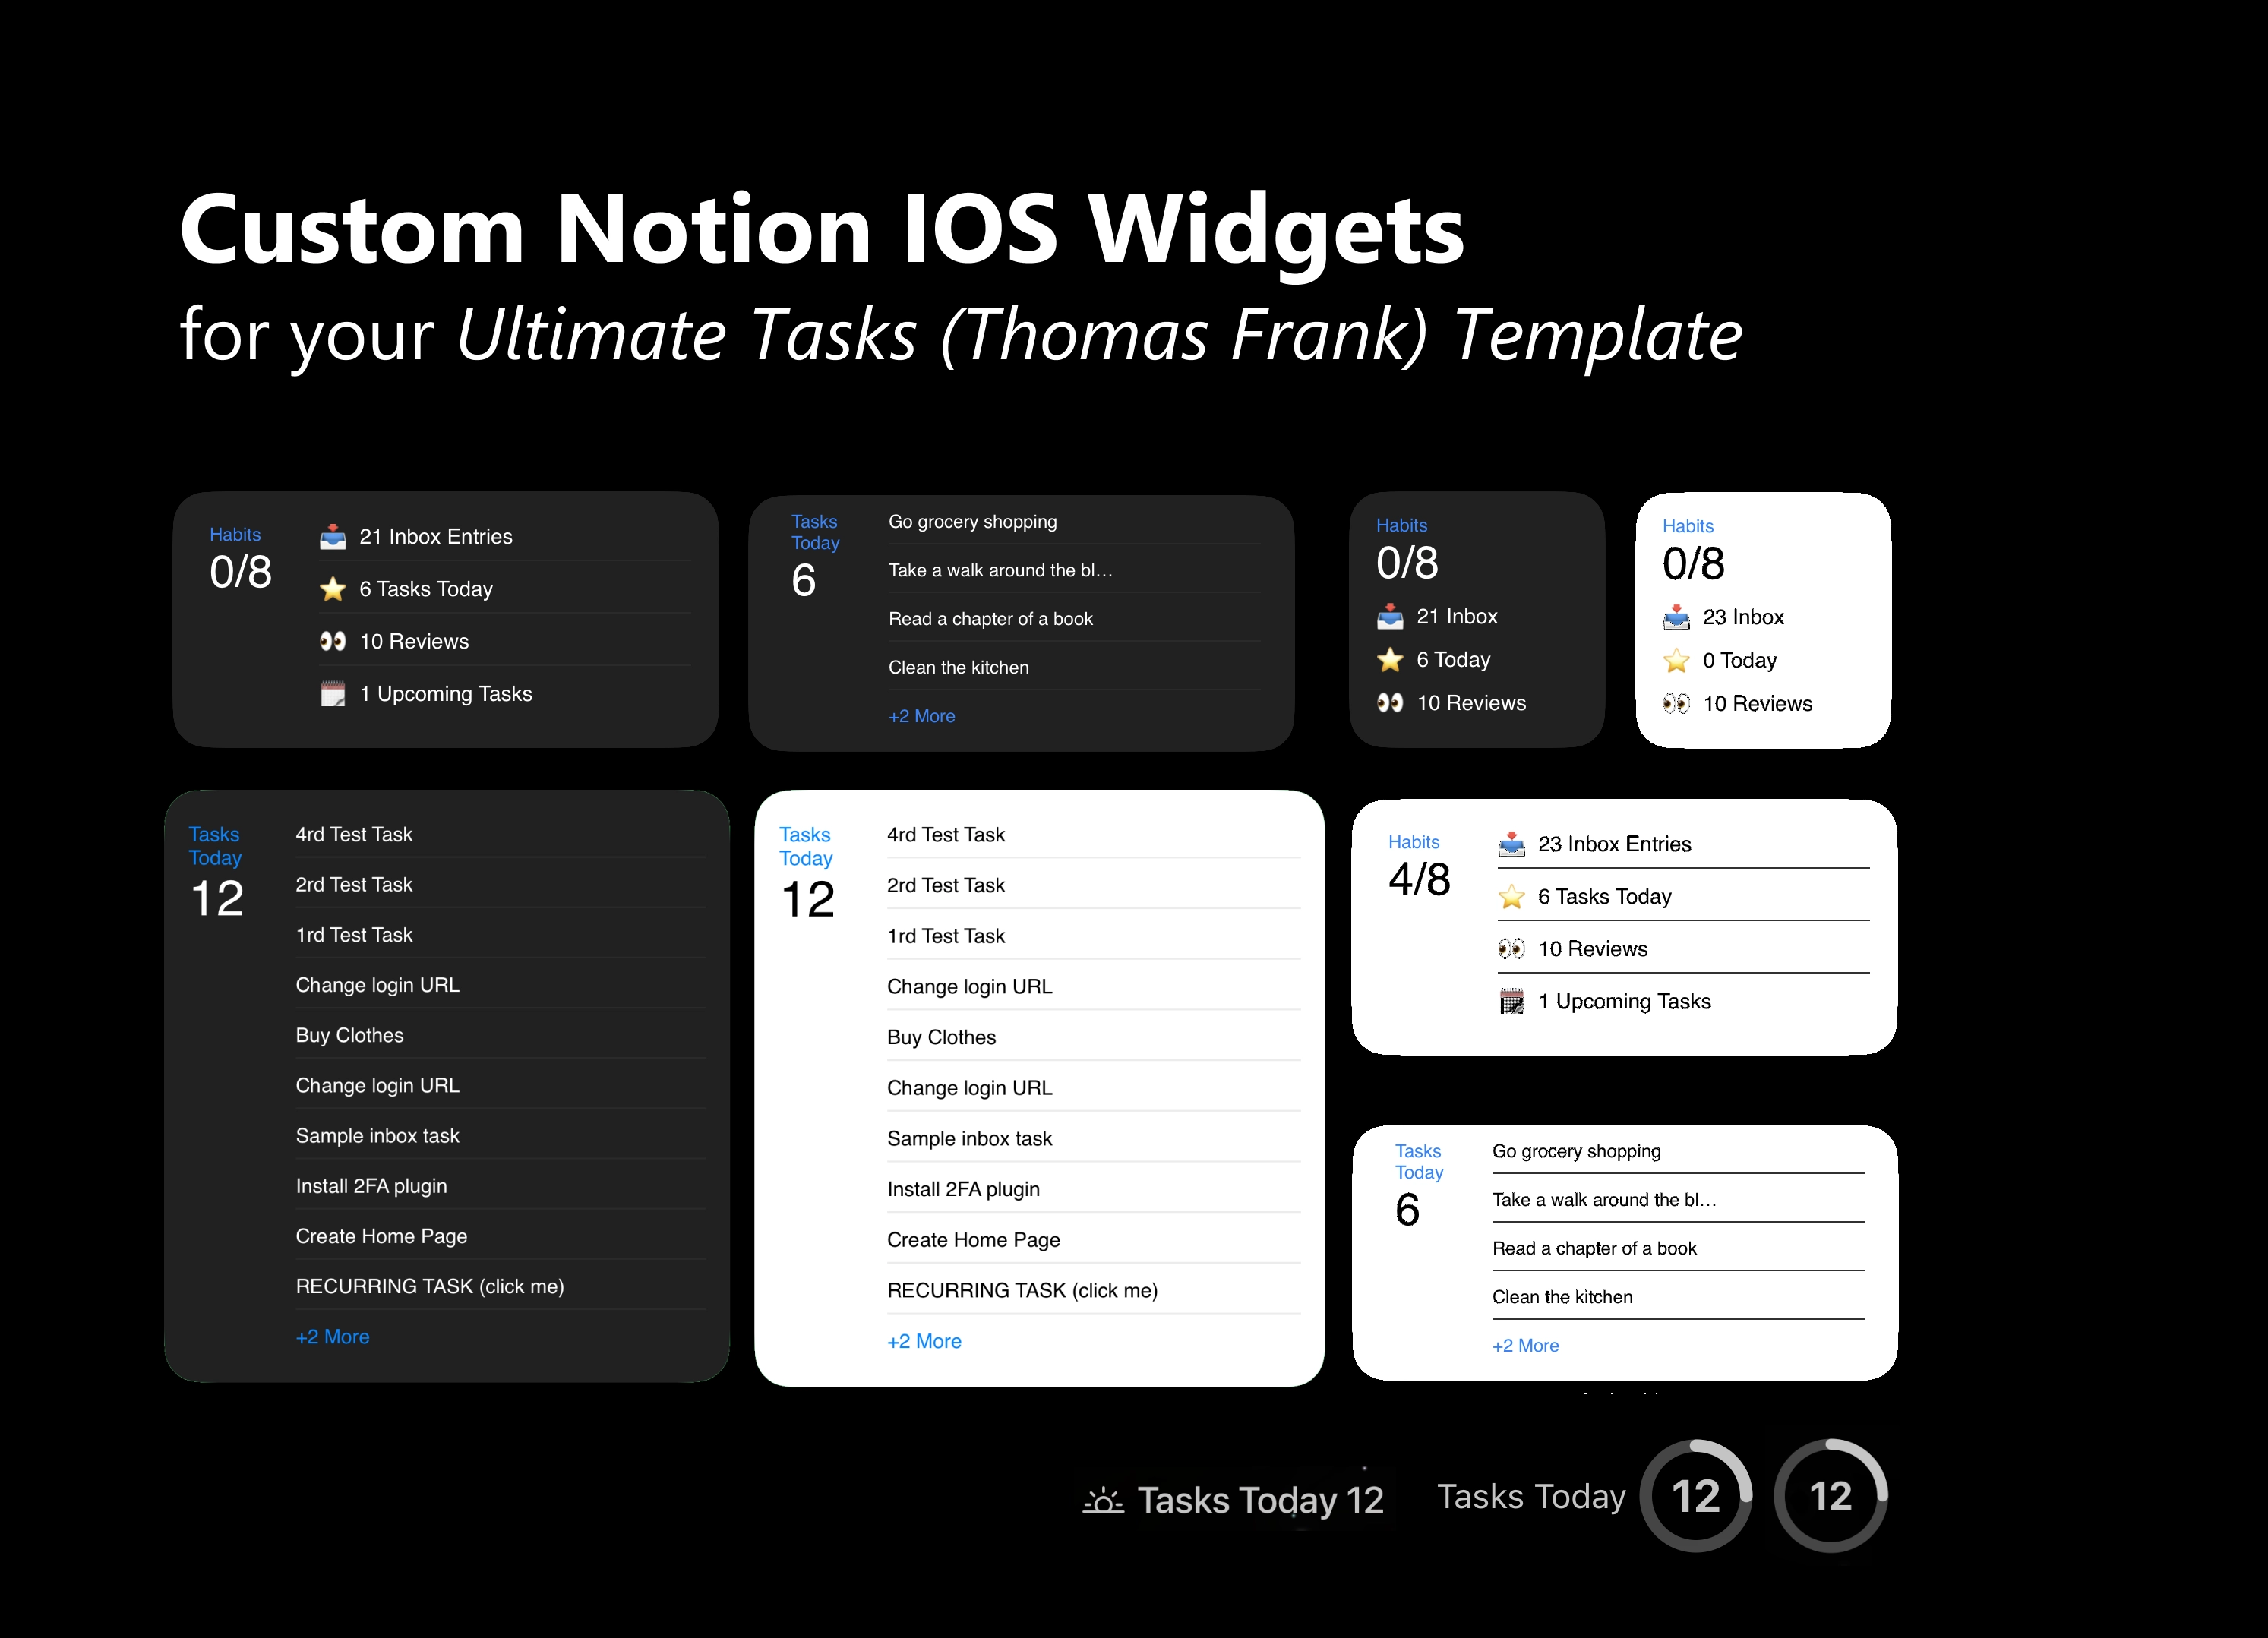 Notion Ultimate Tasks Ios Extension Pack